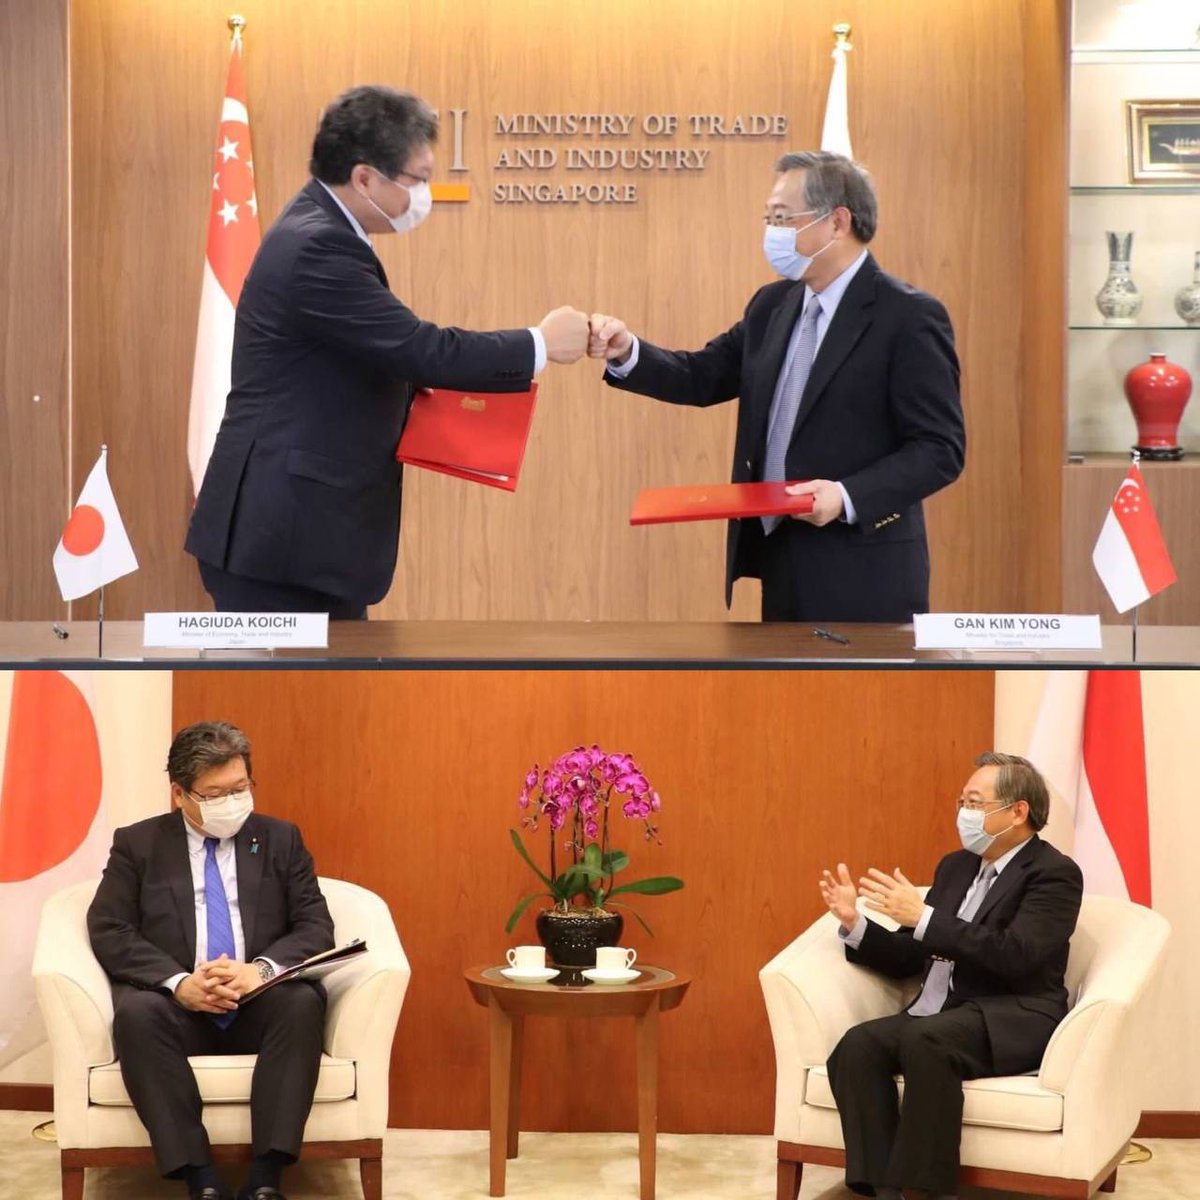 Minister Gan and Japan's Minister for Economy, Trade and Industry Hagiuda Koichi signed a Memorandum of Cooperation (MOC) on Low-Emissions Solutions to facilitate greater collaboration in developing low carbon solutions such as hydrogen. Read more here: bit.ly/3ng9sR9